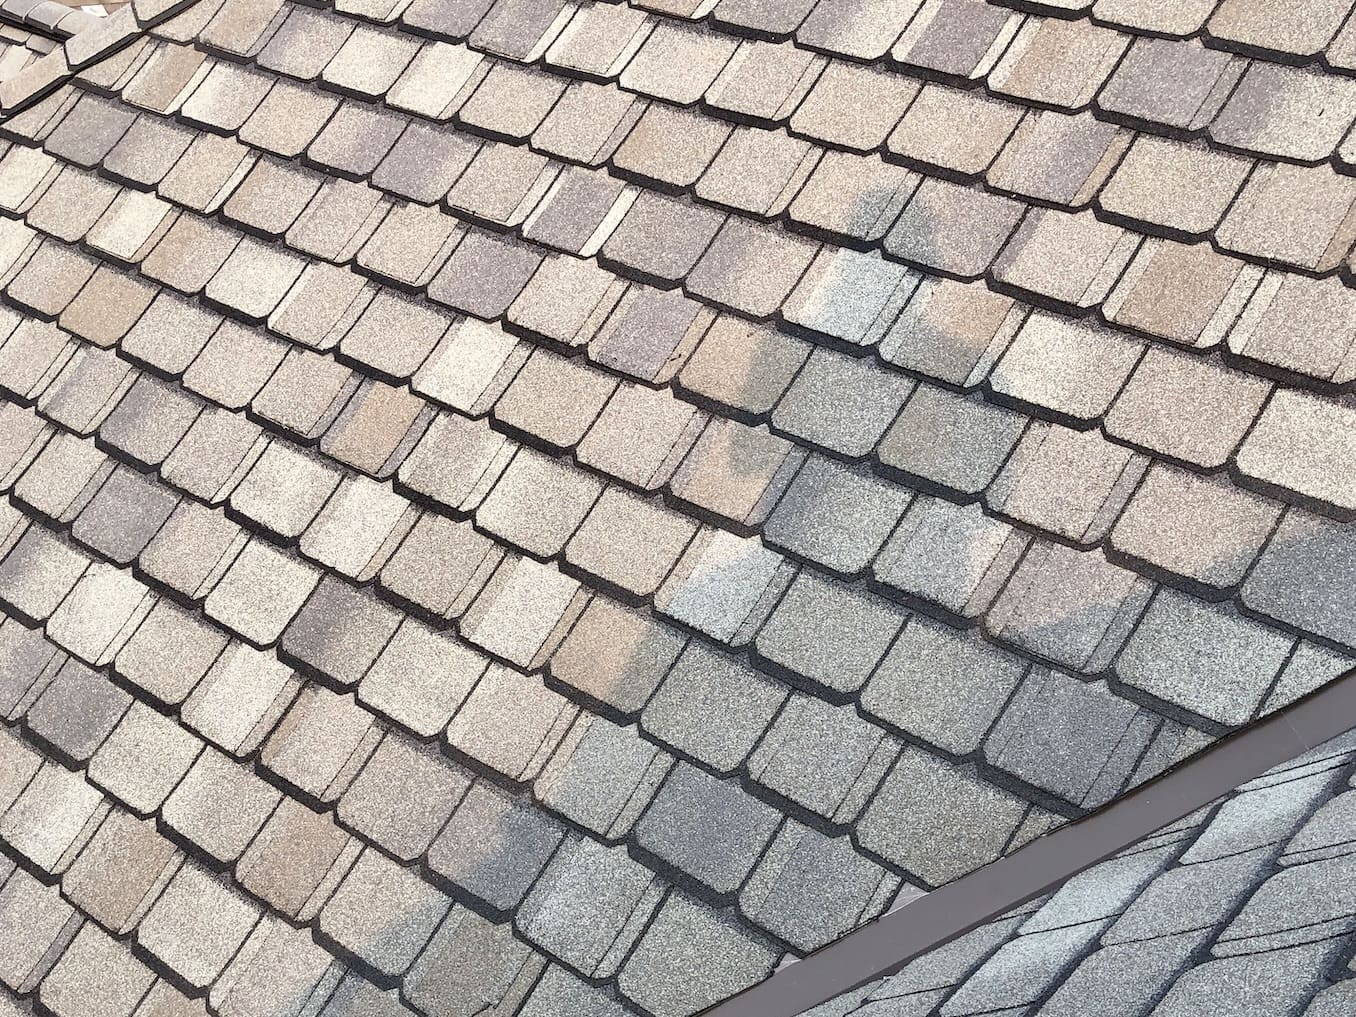 Luxury Residential Roofing Shingles roof view